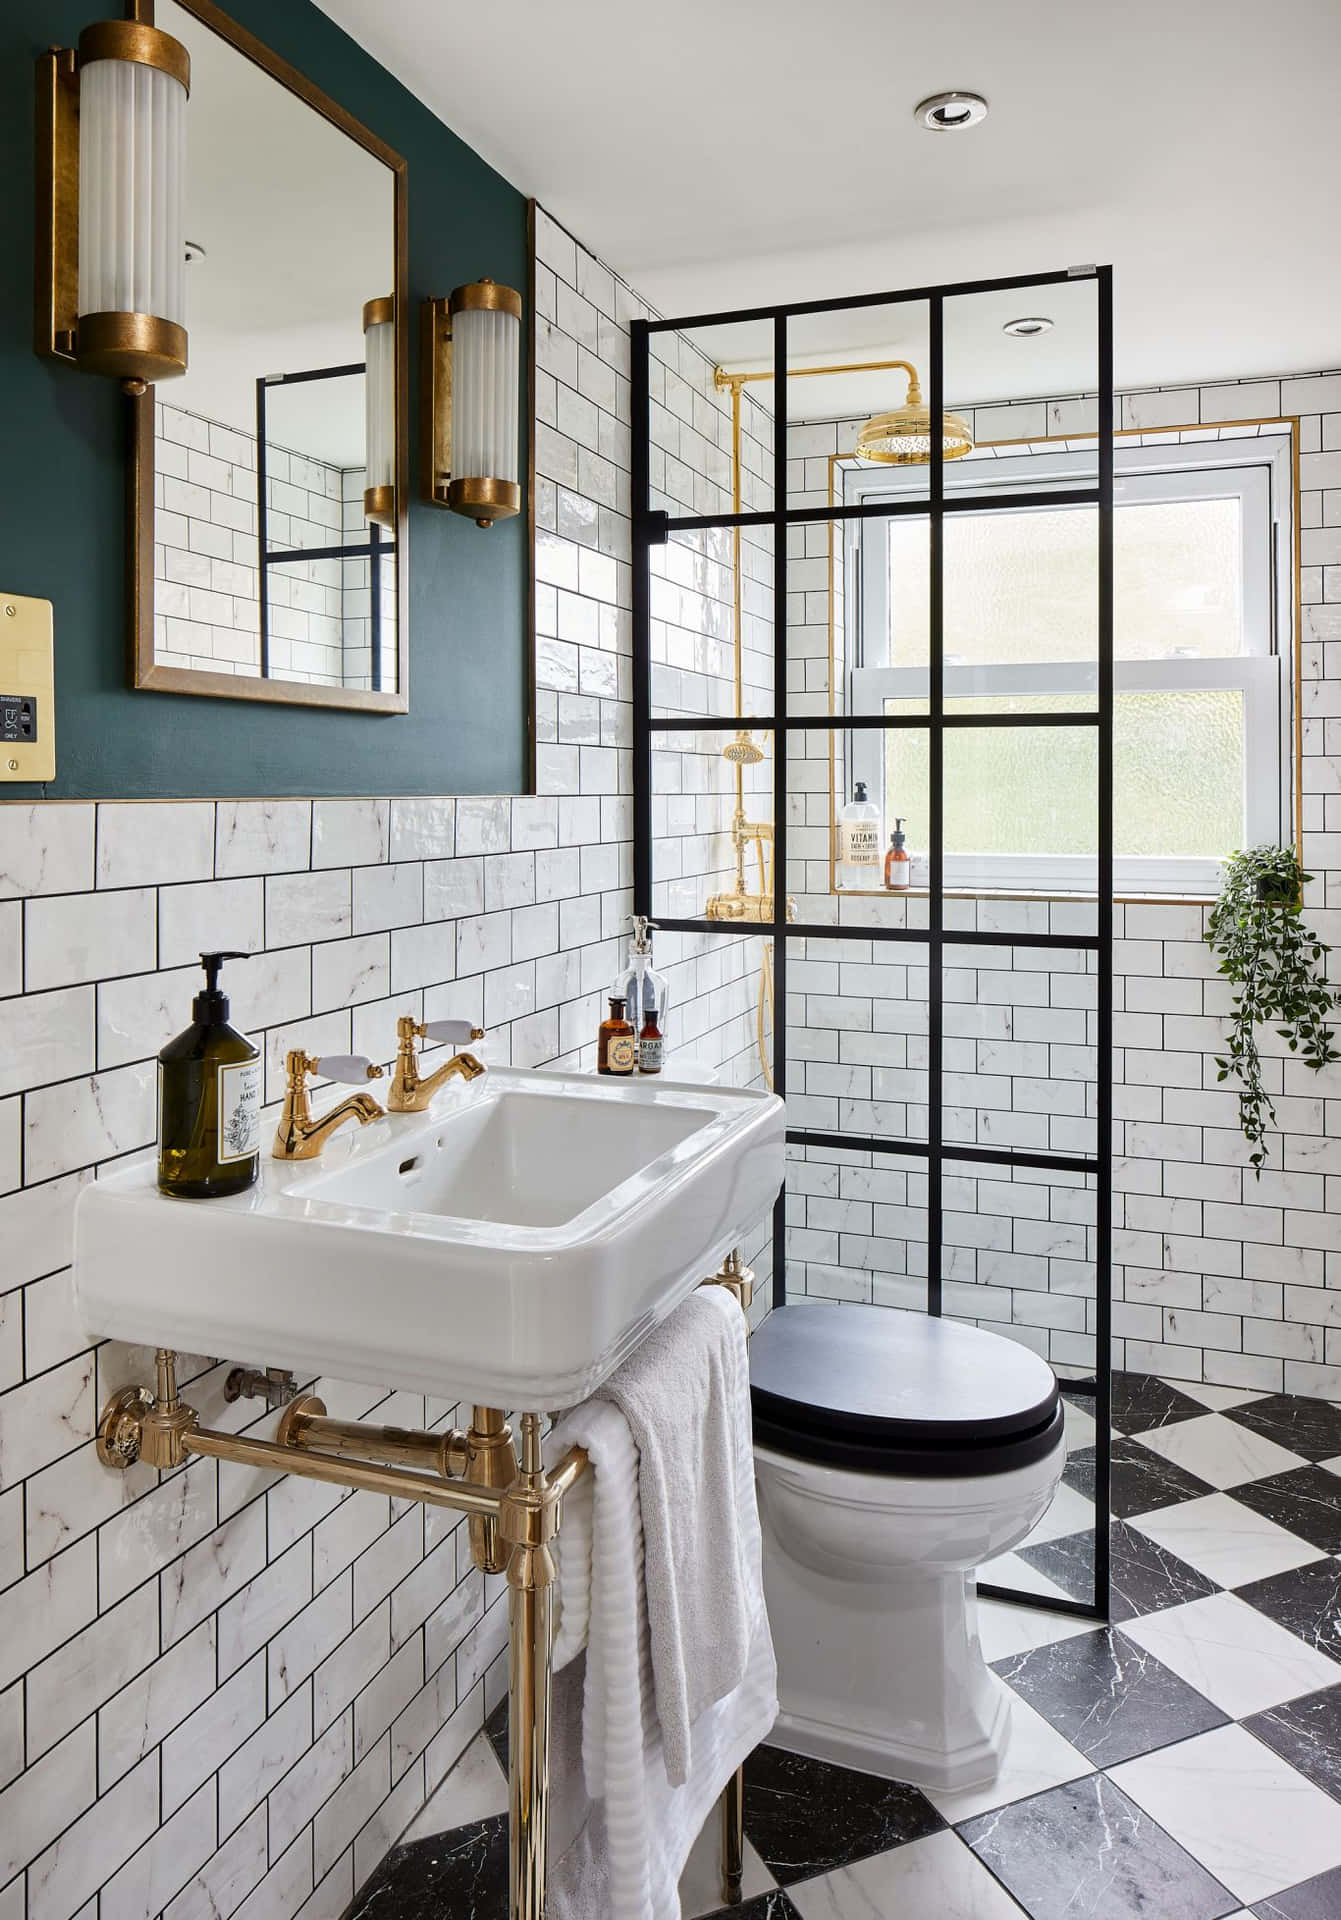 A Bathroom With Black And White Tile And A Gold Sink